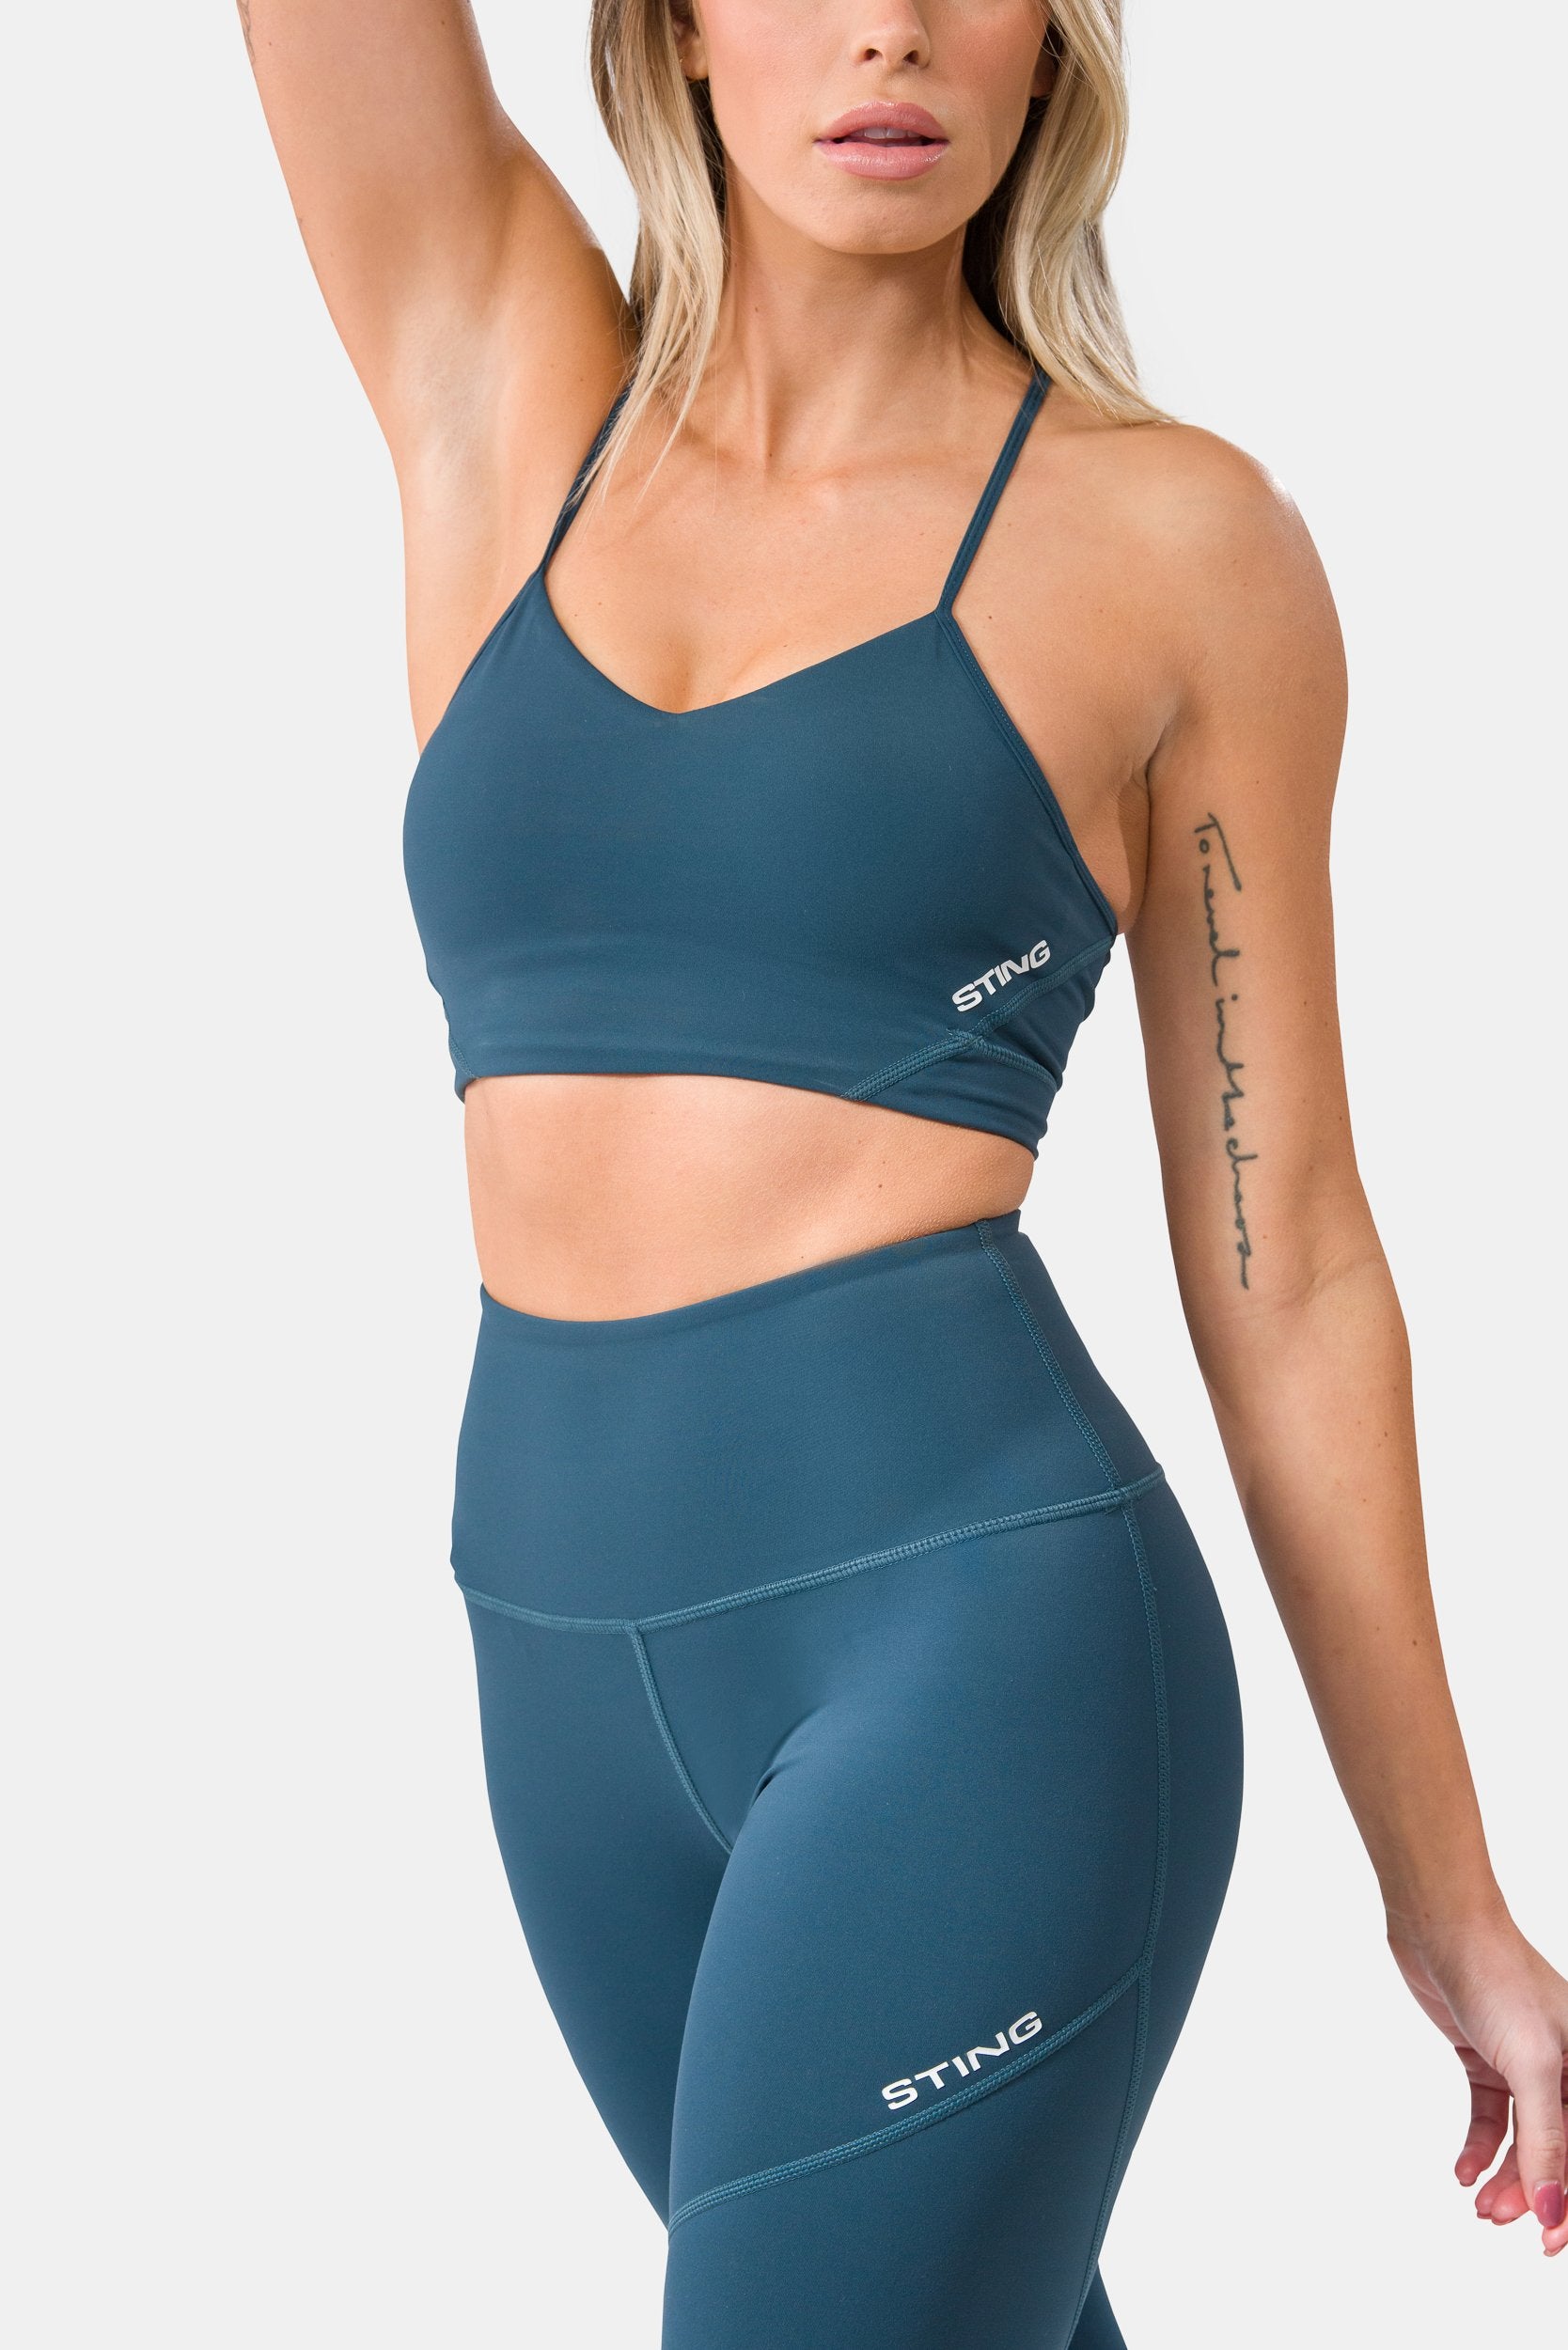 Laura Ashley Women's Activewear On Sale Up To 90% Off Retail